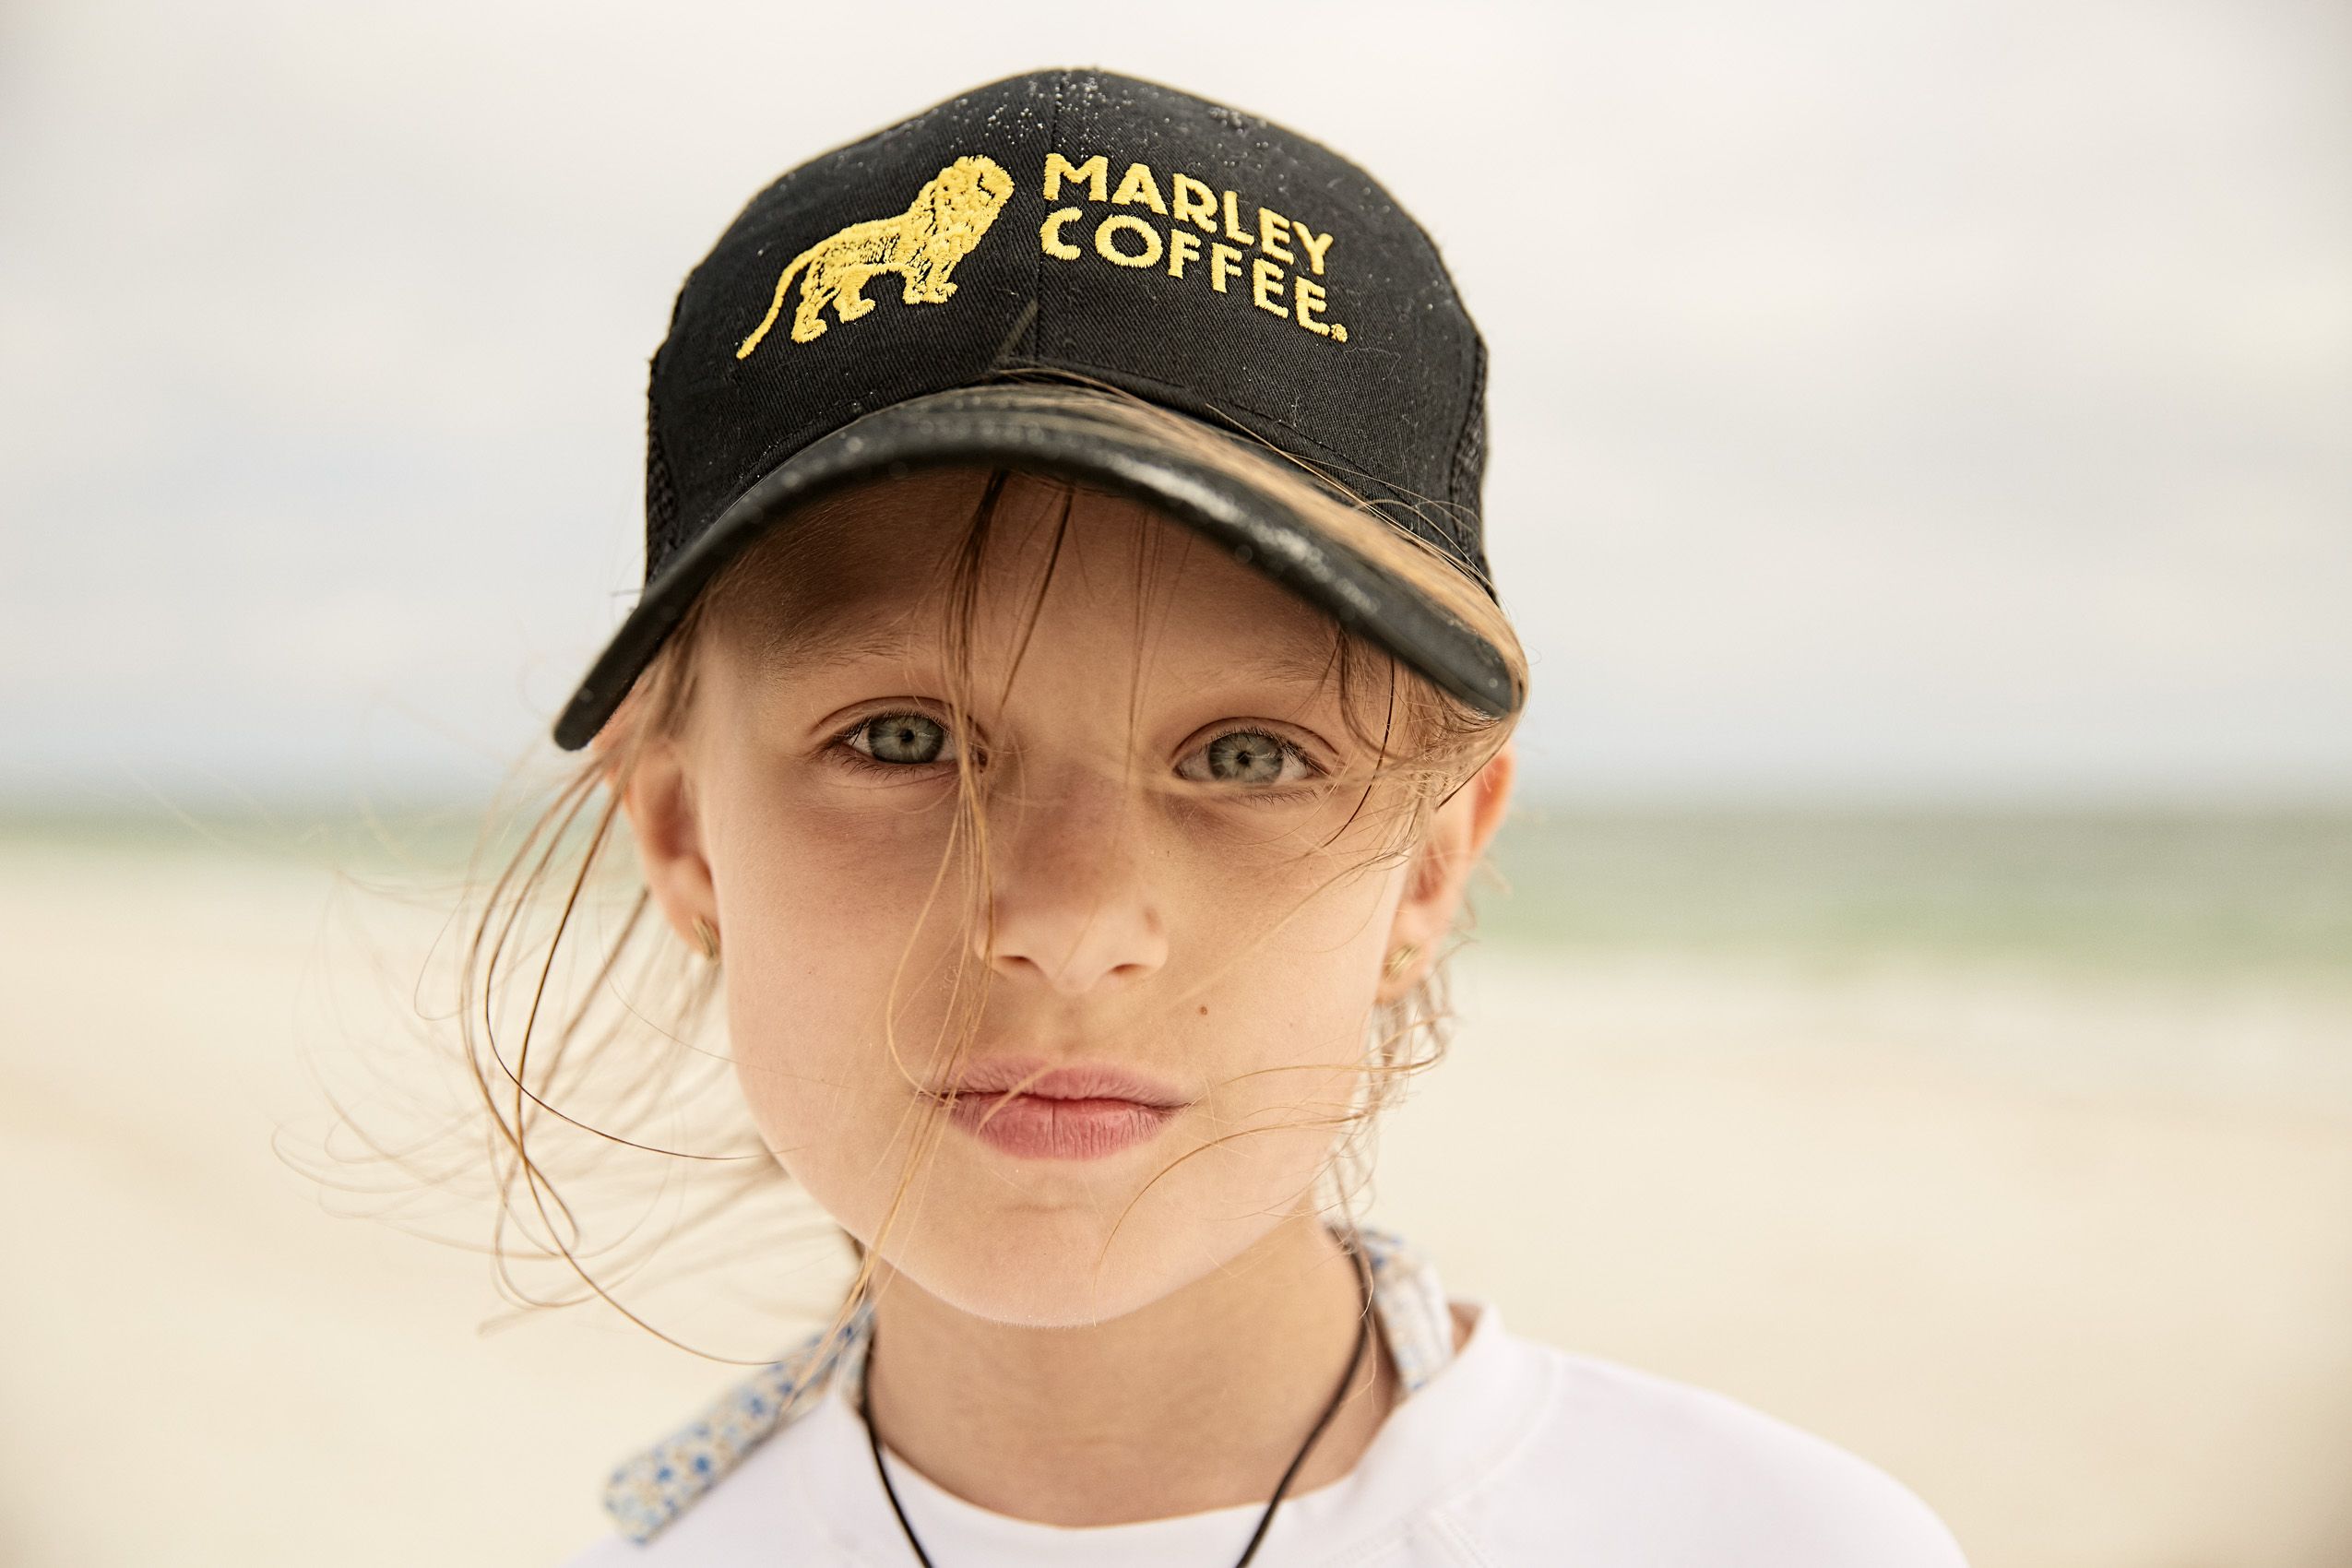 Girl in Marley Coffee Hat